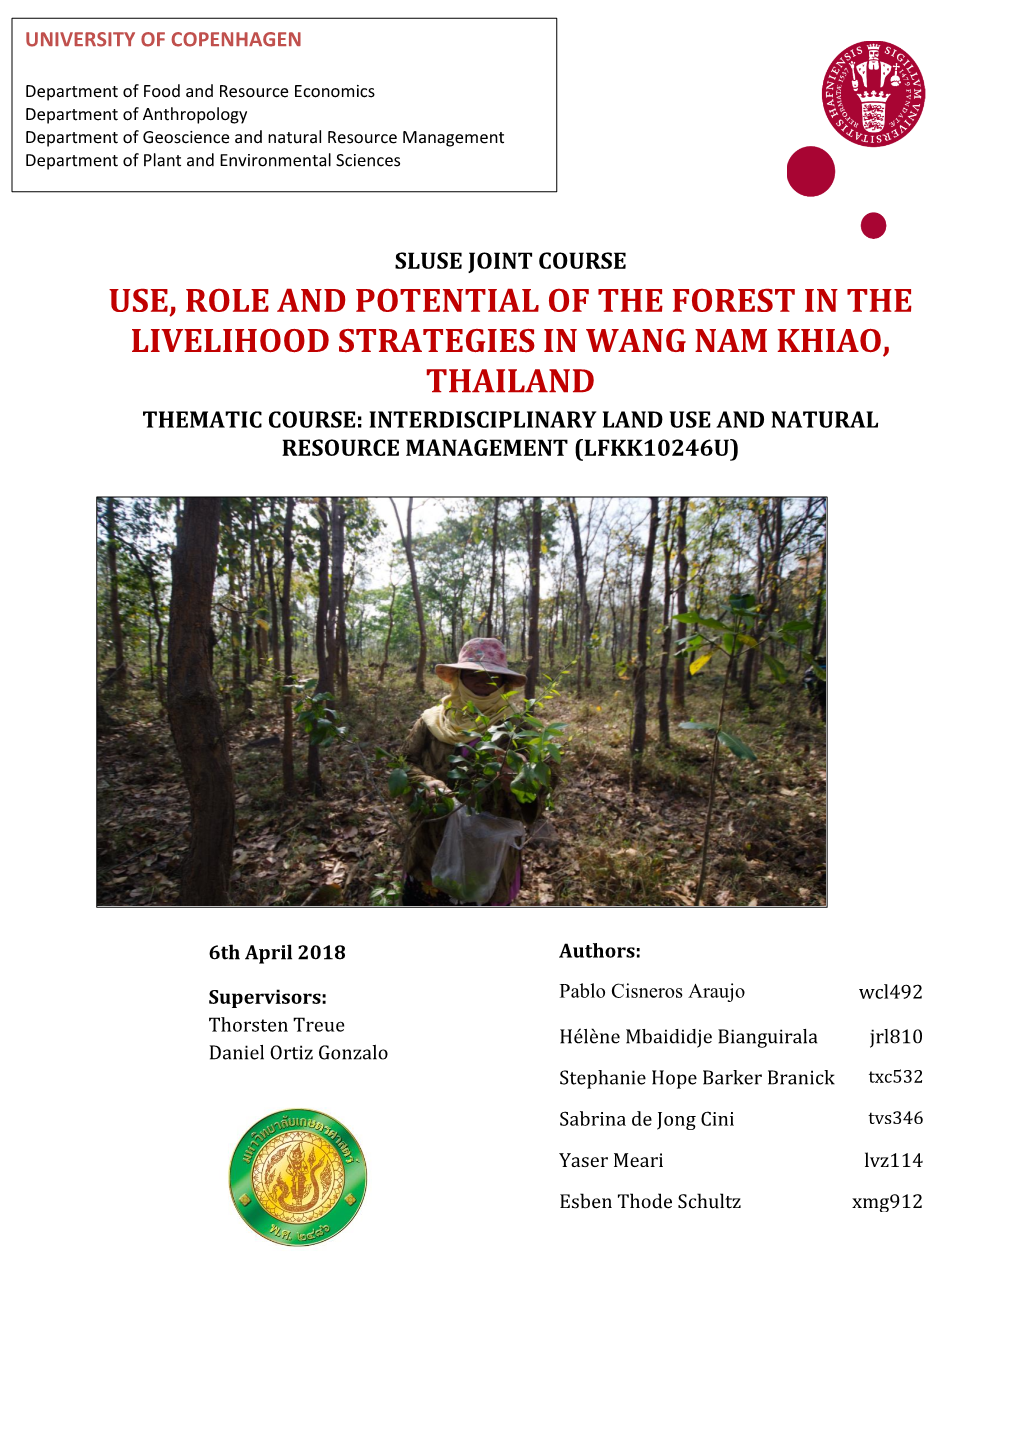 Use, Role and Potential of the Forest in the Livelihood Strategies In